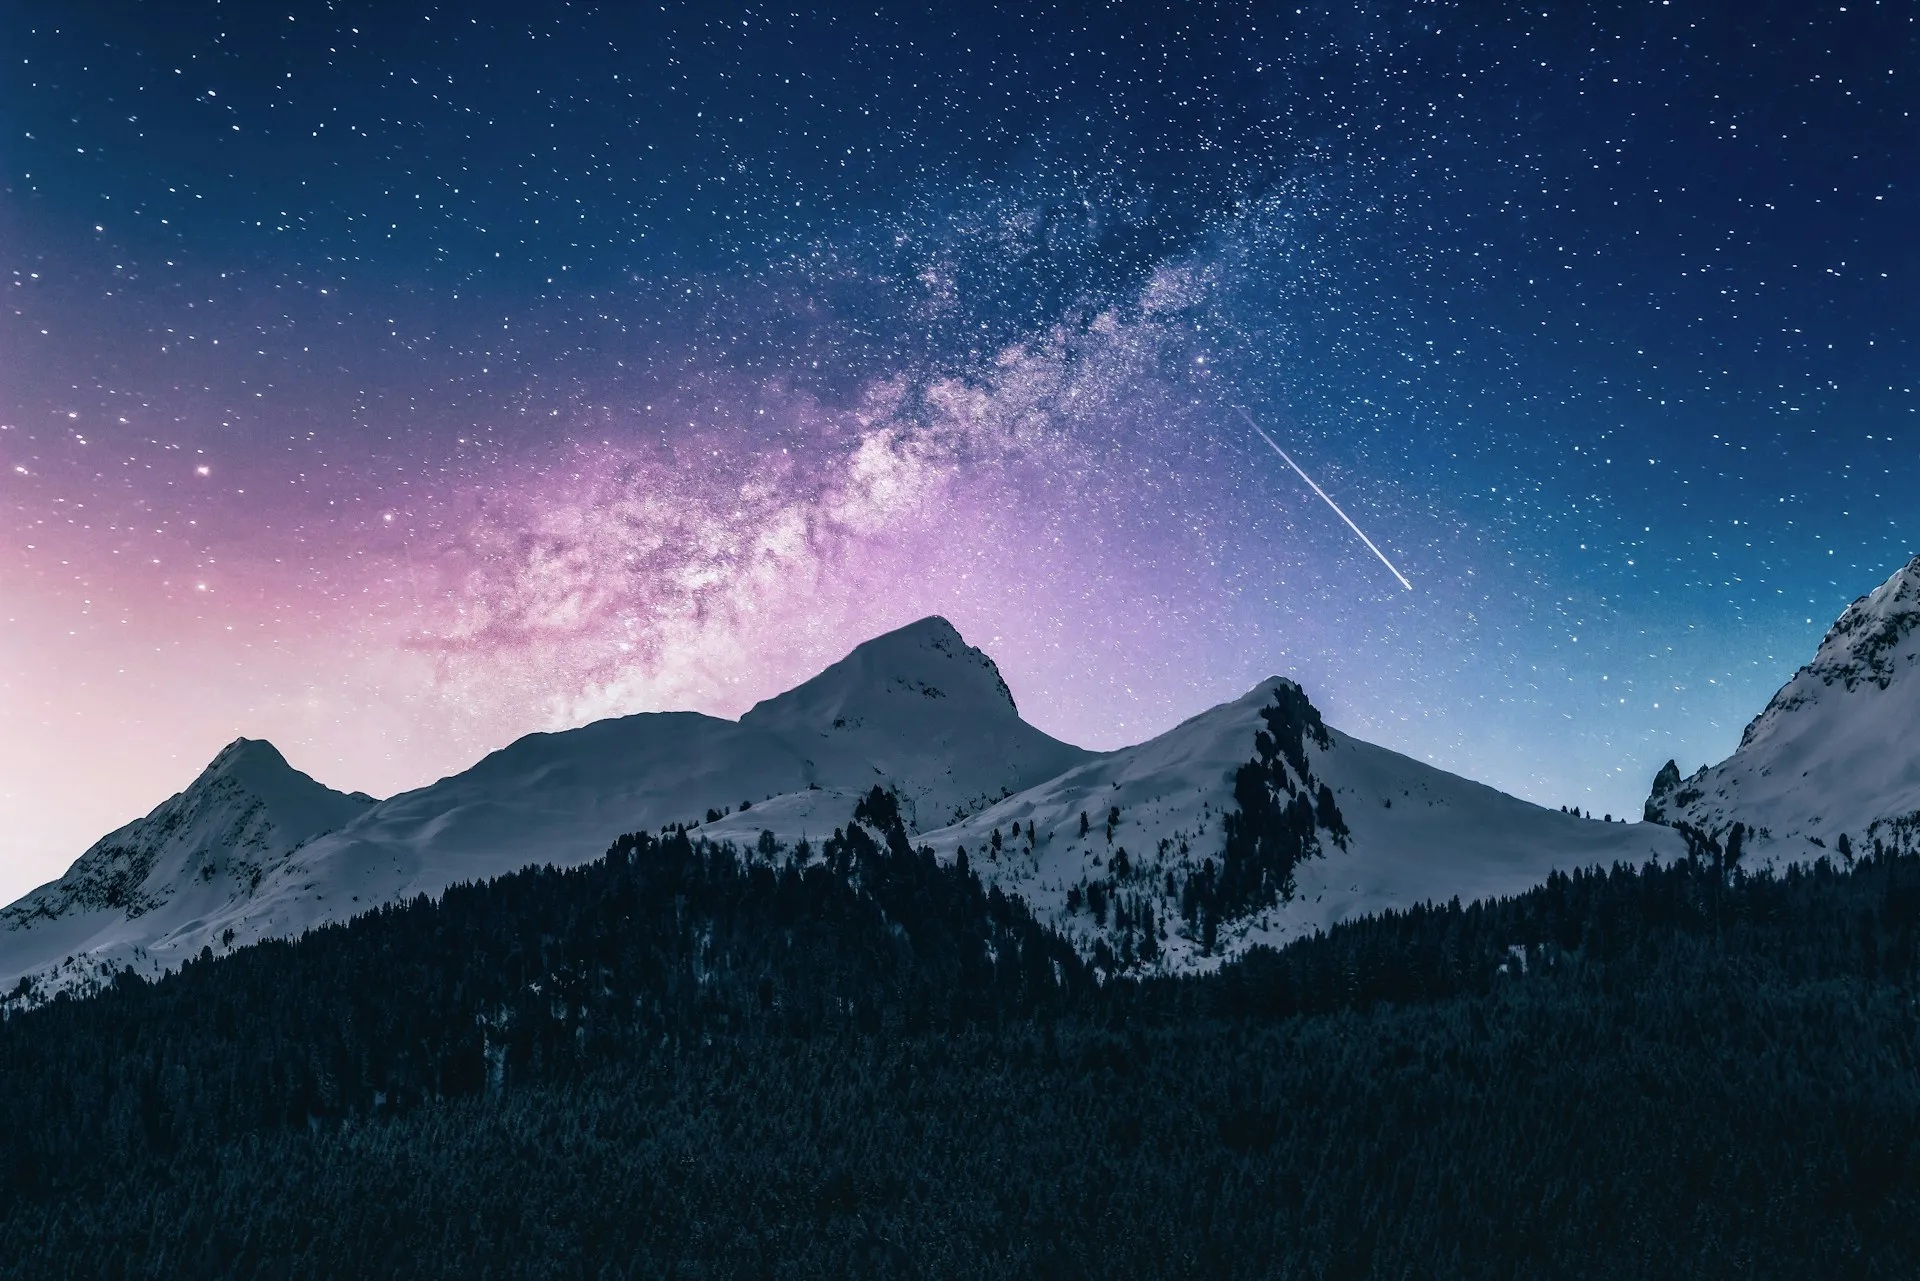 Post image: Italian alps with a starry sky